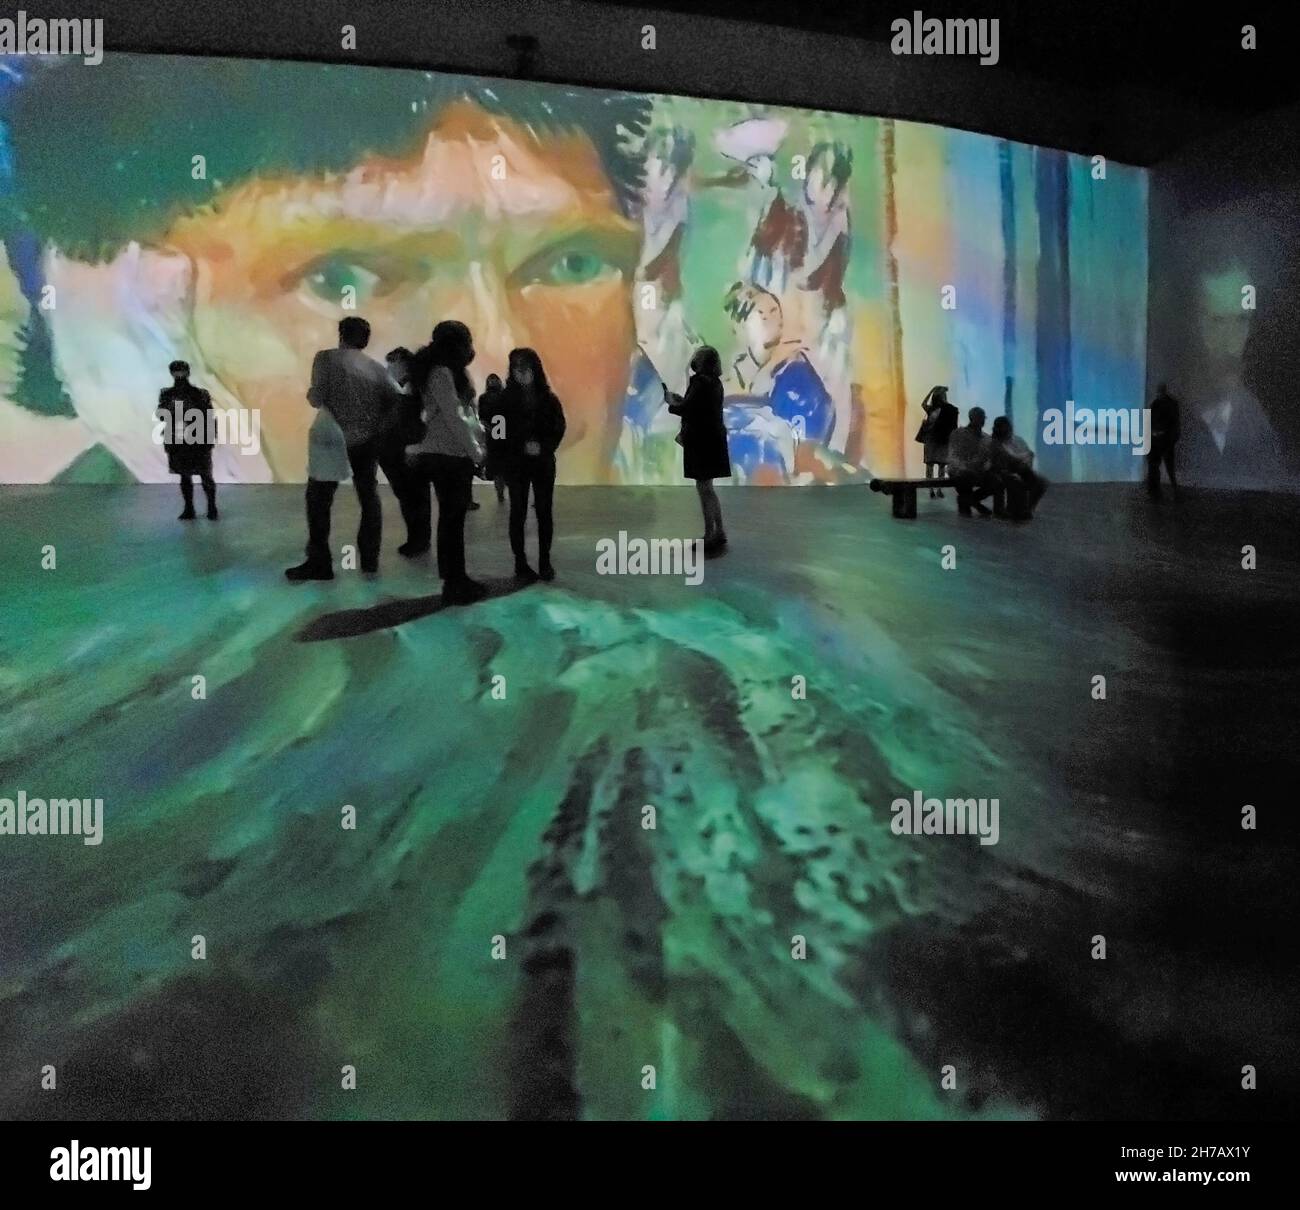 Immersive display featuring the artist's works at Van Gogh exhibit in the Milwaukee Convention Center, Milwaukee, WI. Stock Photo